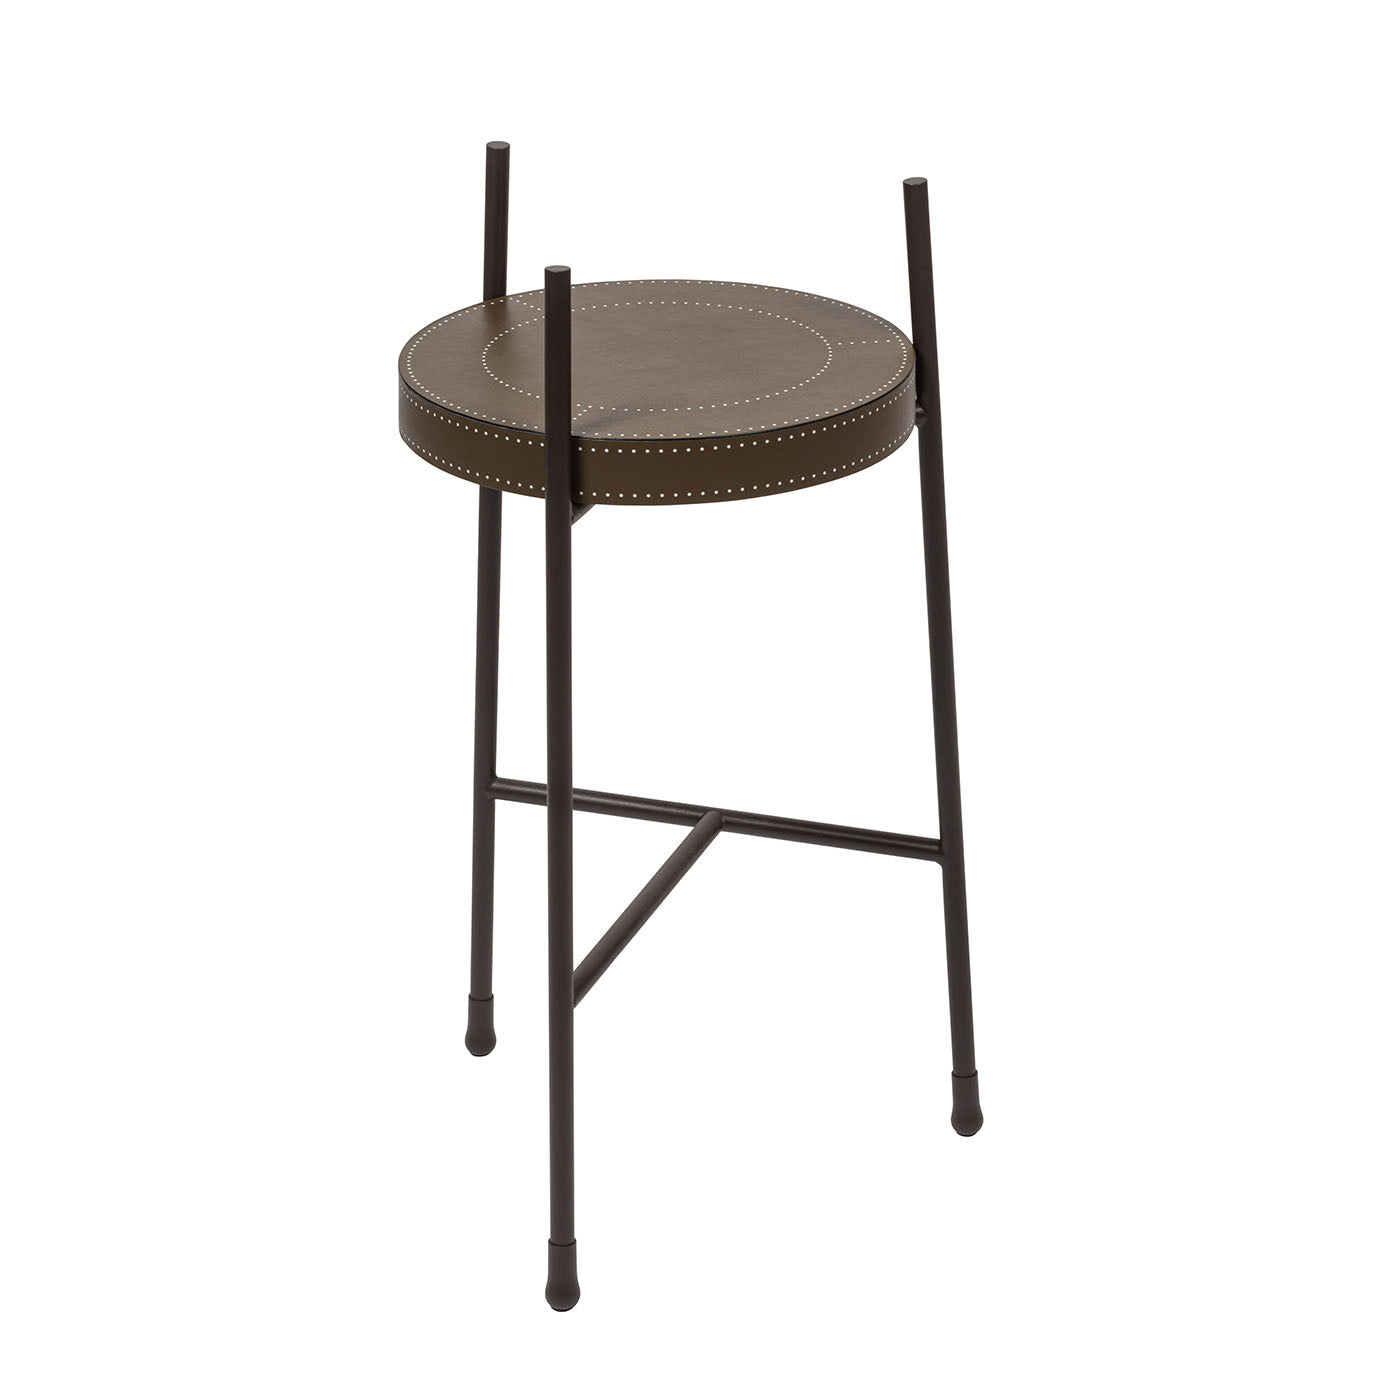 Oblivion Small Brown Leather Side Table - Alternative view 1